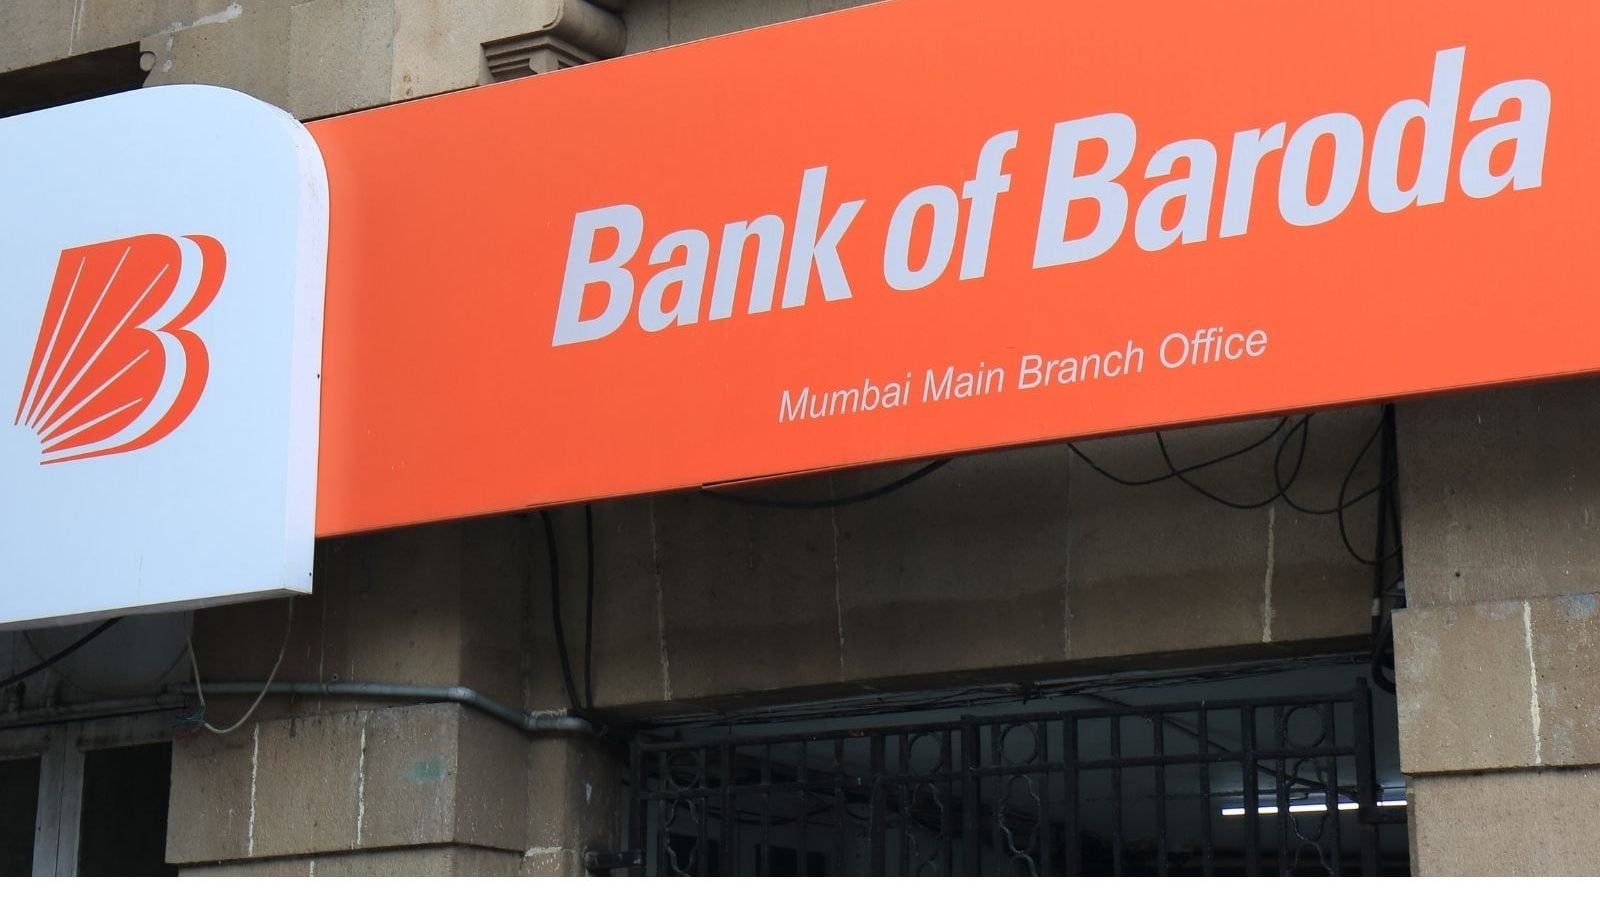 Top Bank Of Baroda Kiosk Banking Services in Jabalpur - Best Bank Of Baroda  Kiosk Banking Services - Justdial